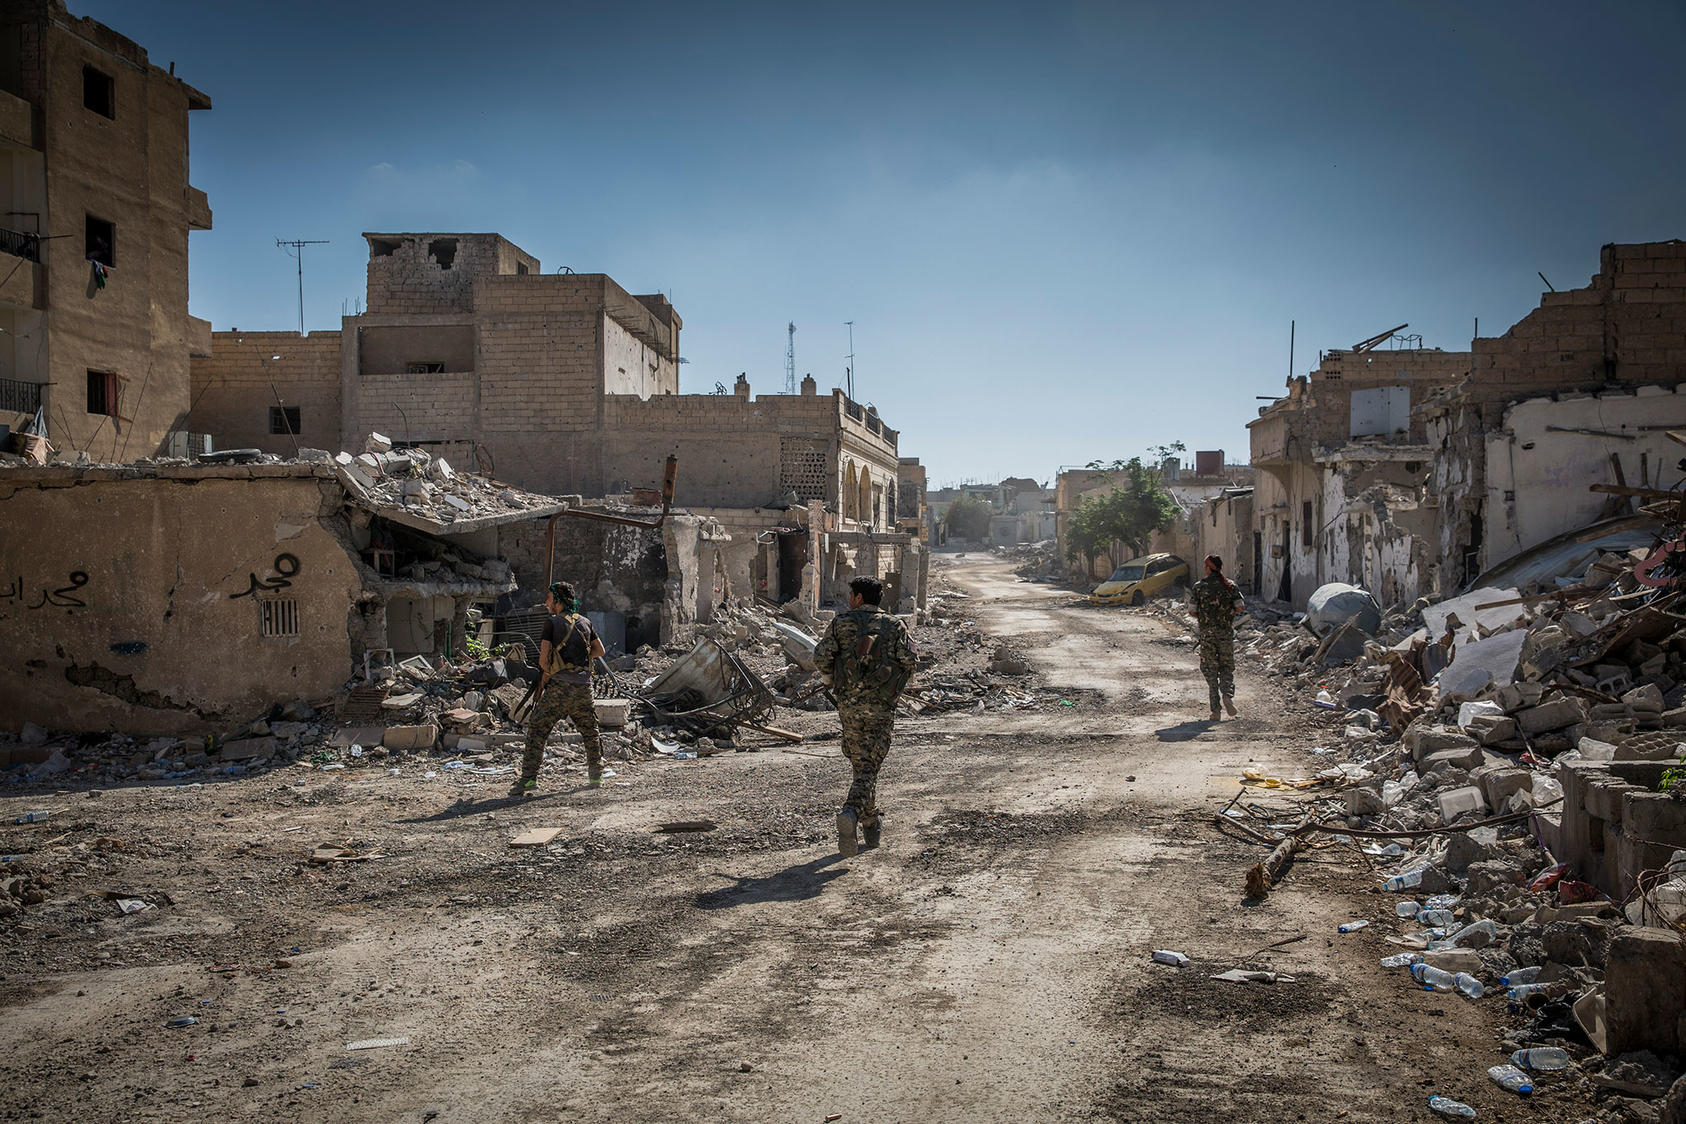 Soldiers with the Syrian Democratic Forces move through the destroyed streets of east Raqqa